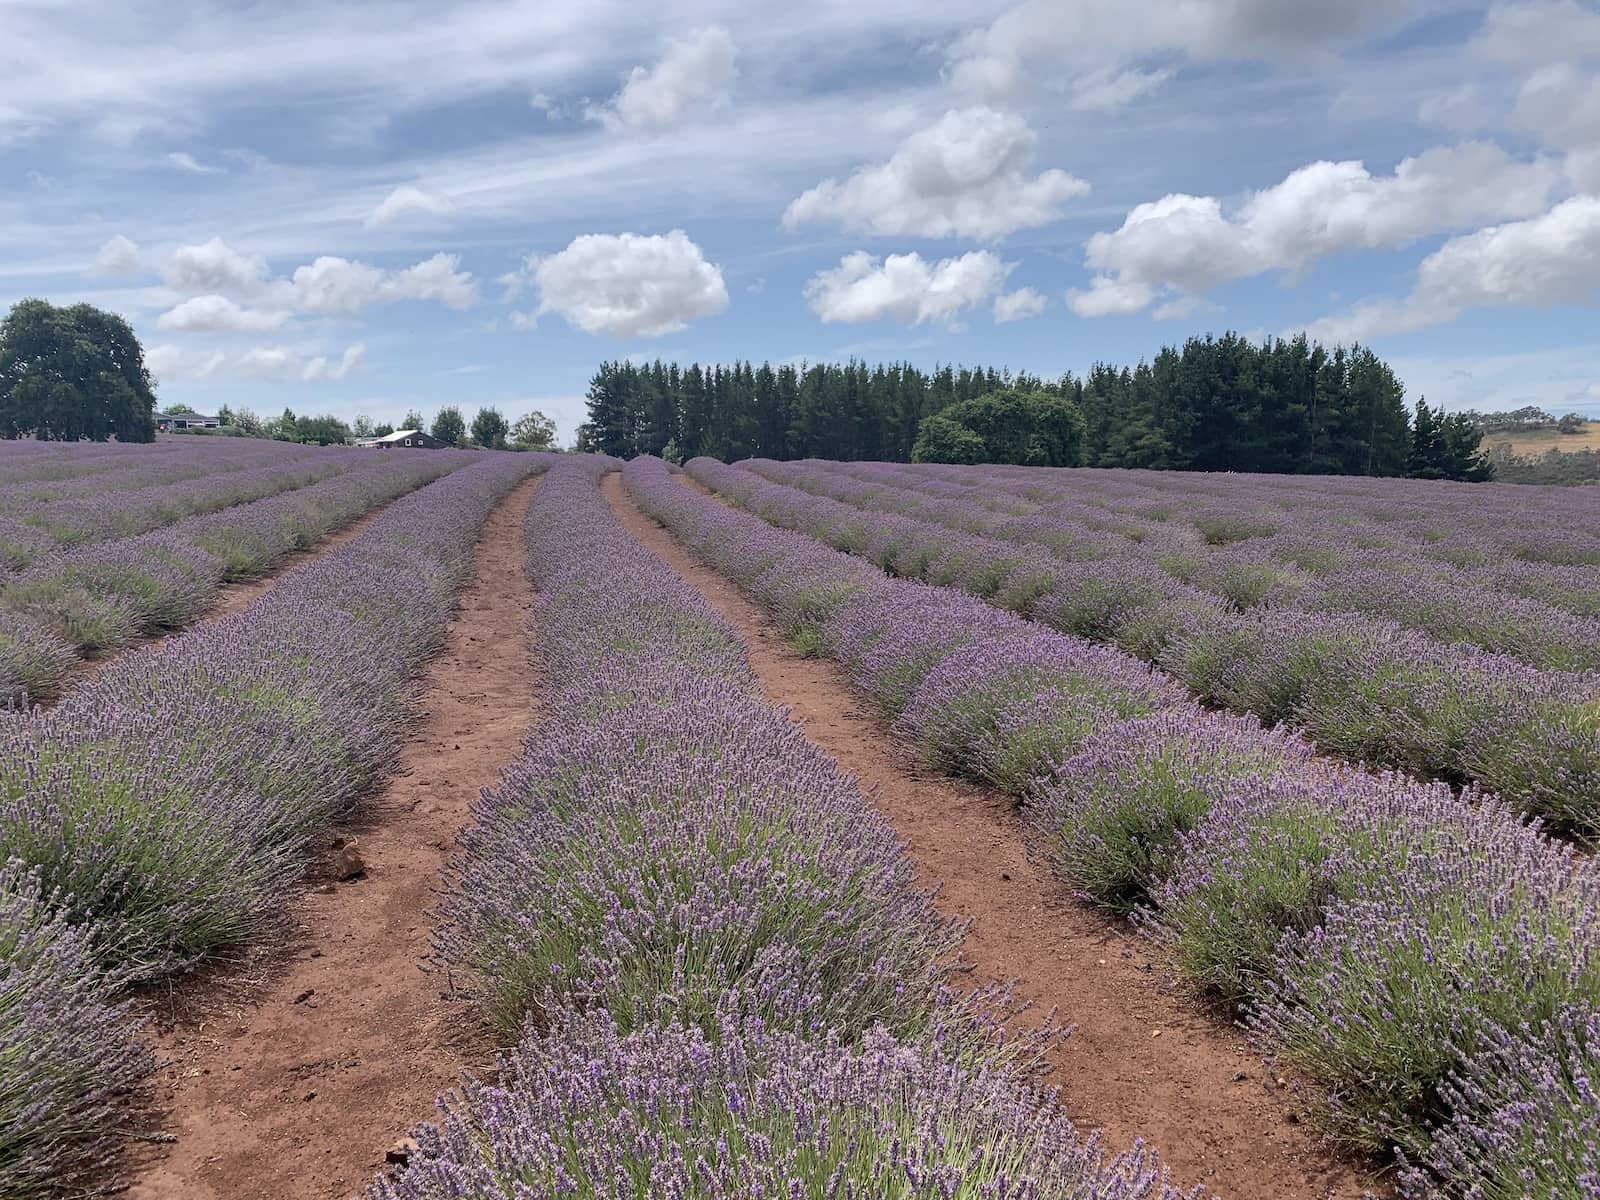 Rows of fresh lavender extending into the distance, with a blue cloudy sky